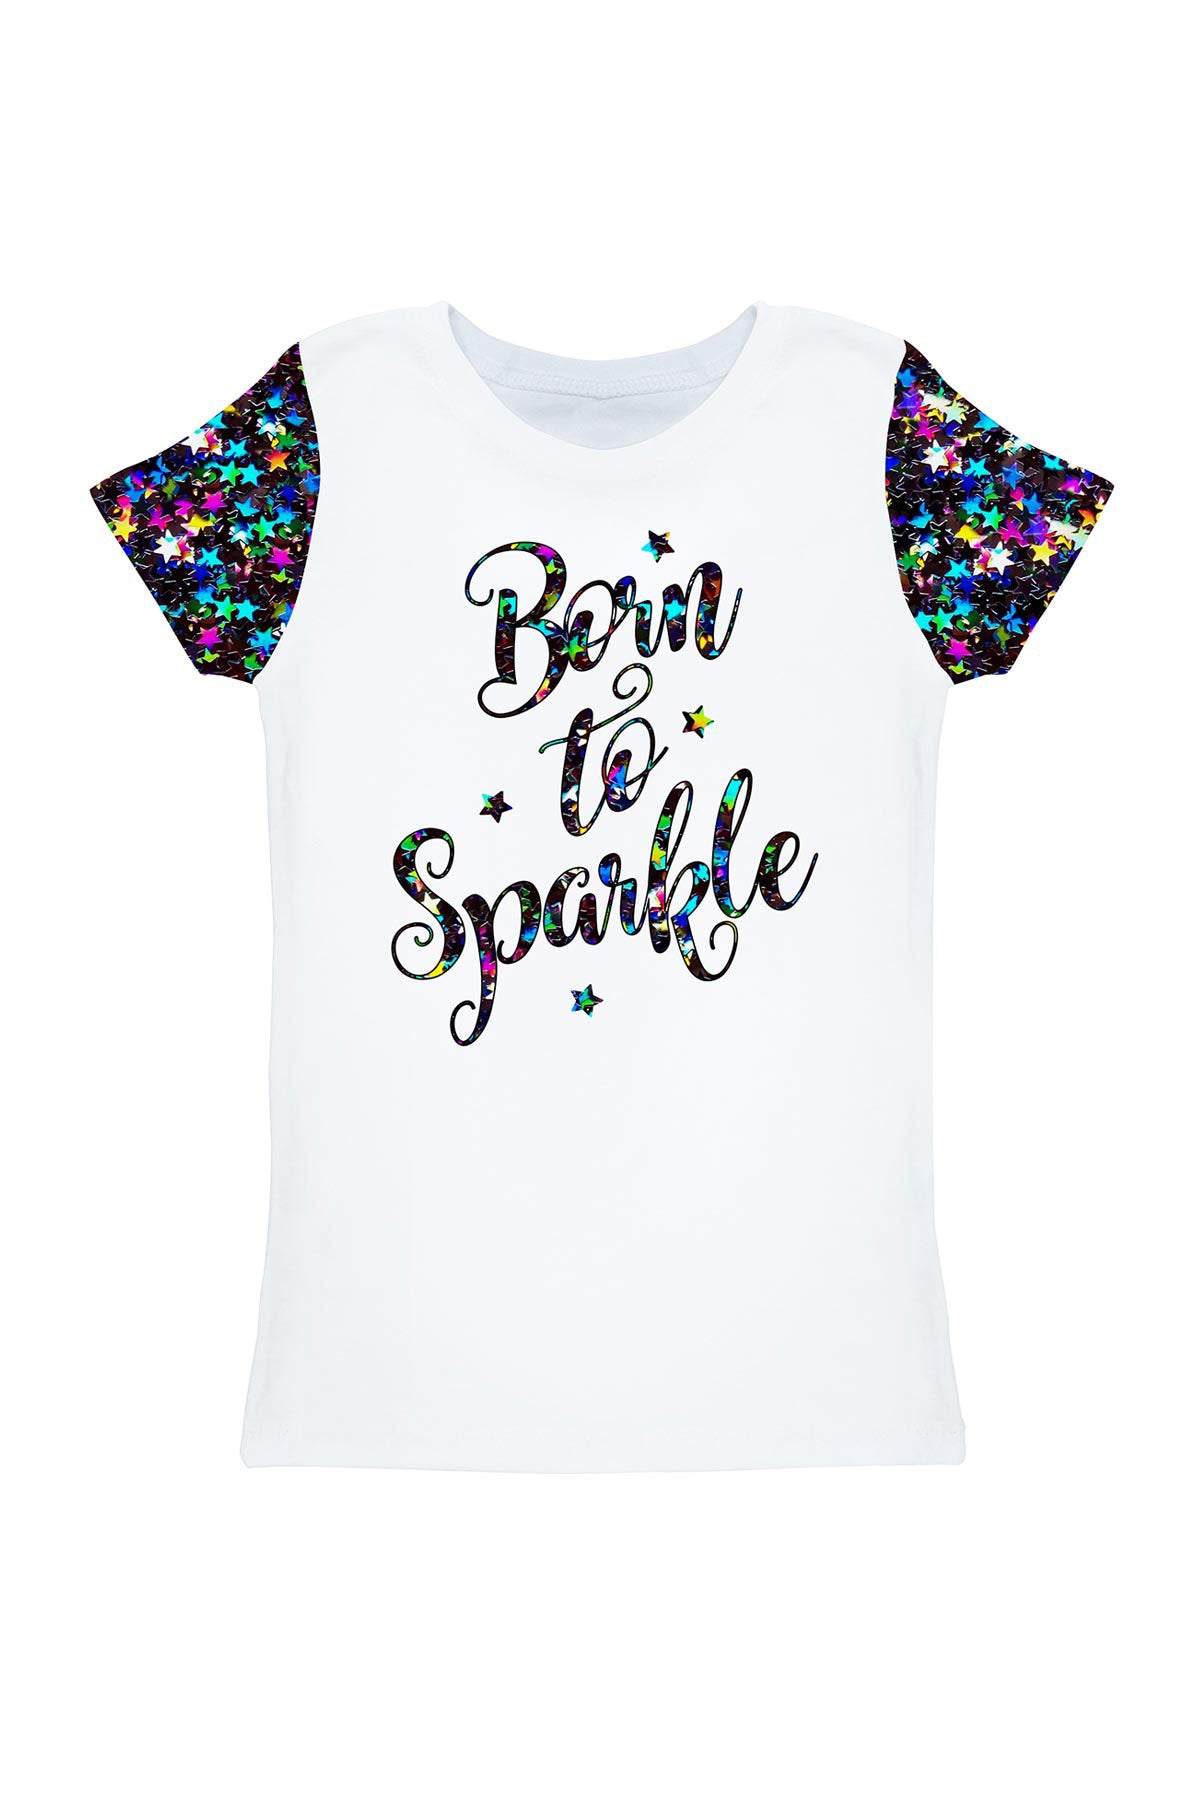 Fireworks Zoe White Cute Printed Designer Quote T-Shirt - Kids - Pineapple Clothing